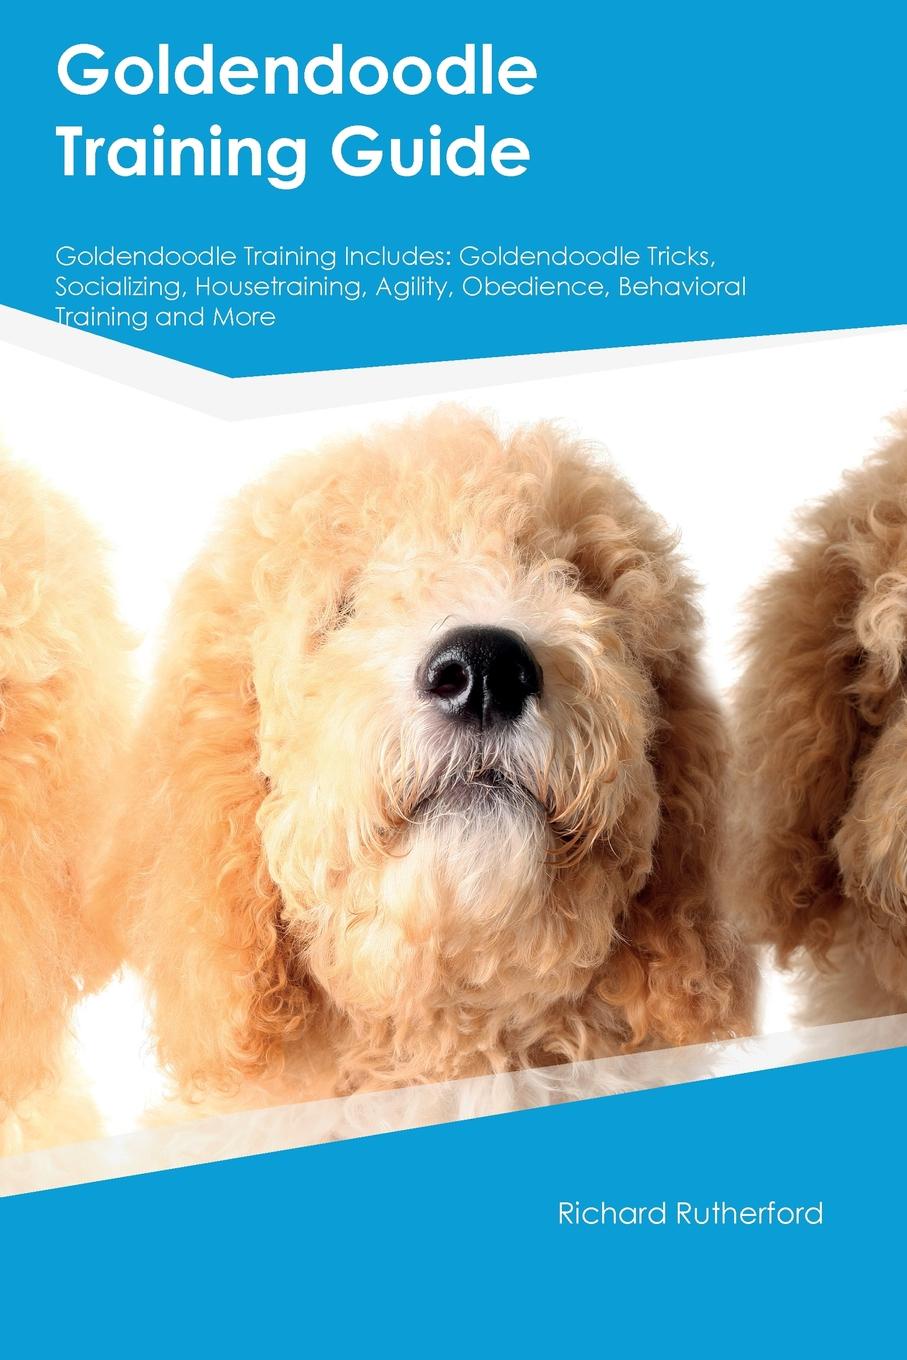 Goldendoodle Training Guide Goldendoodle Training Includes. Goldendoodle Tricks, Socializing, Housetraining, Agility, Obedience, Behavioral Training and More